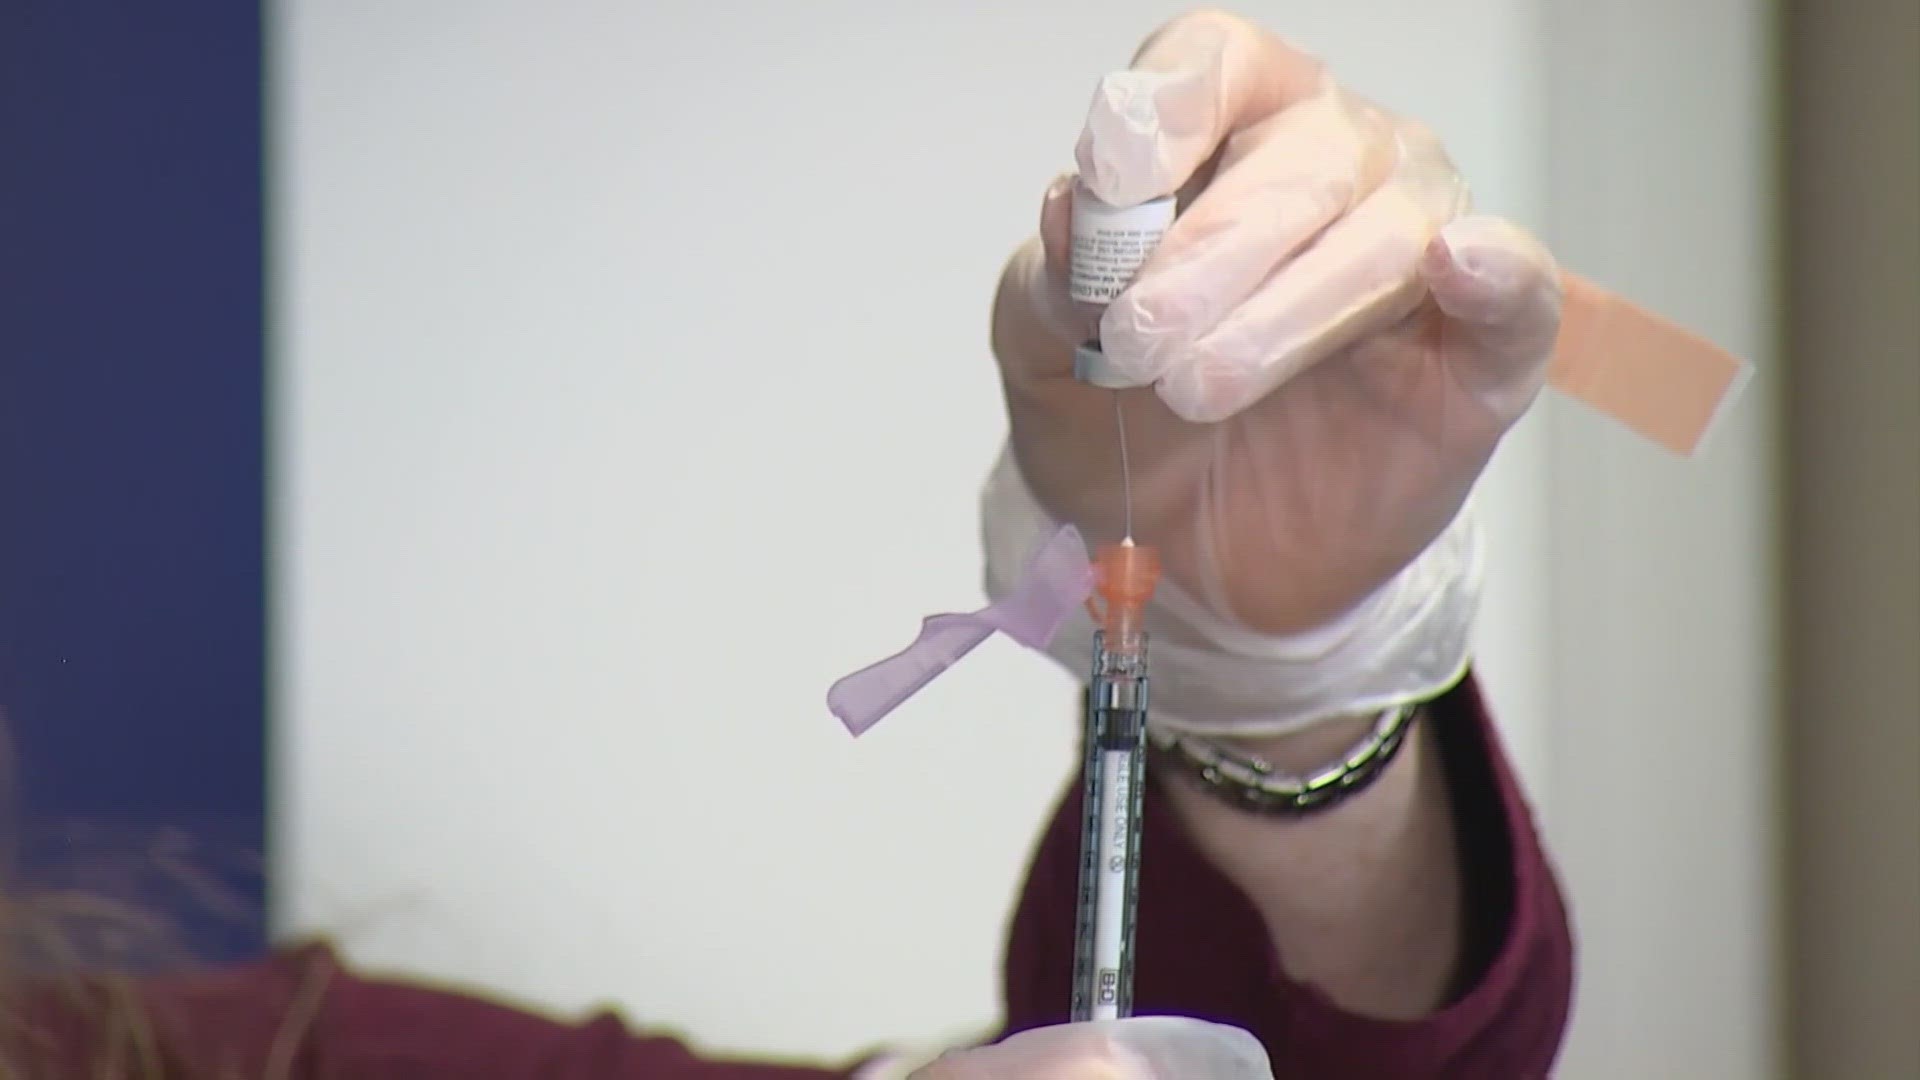 It comes as the CDC recommends a new COVID vaccine. Public Health of Seattle & King County says it's worth it to get the shot.